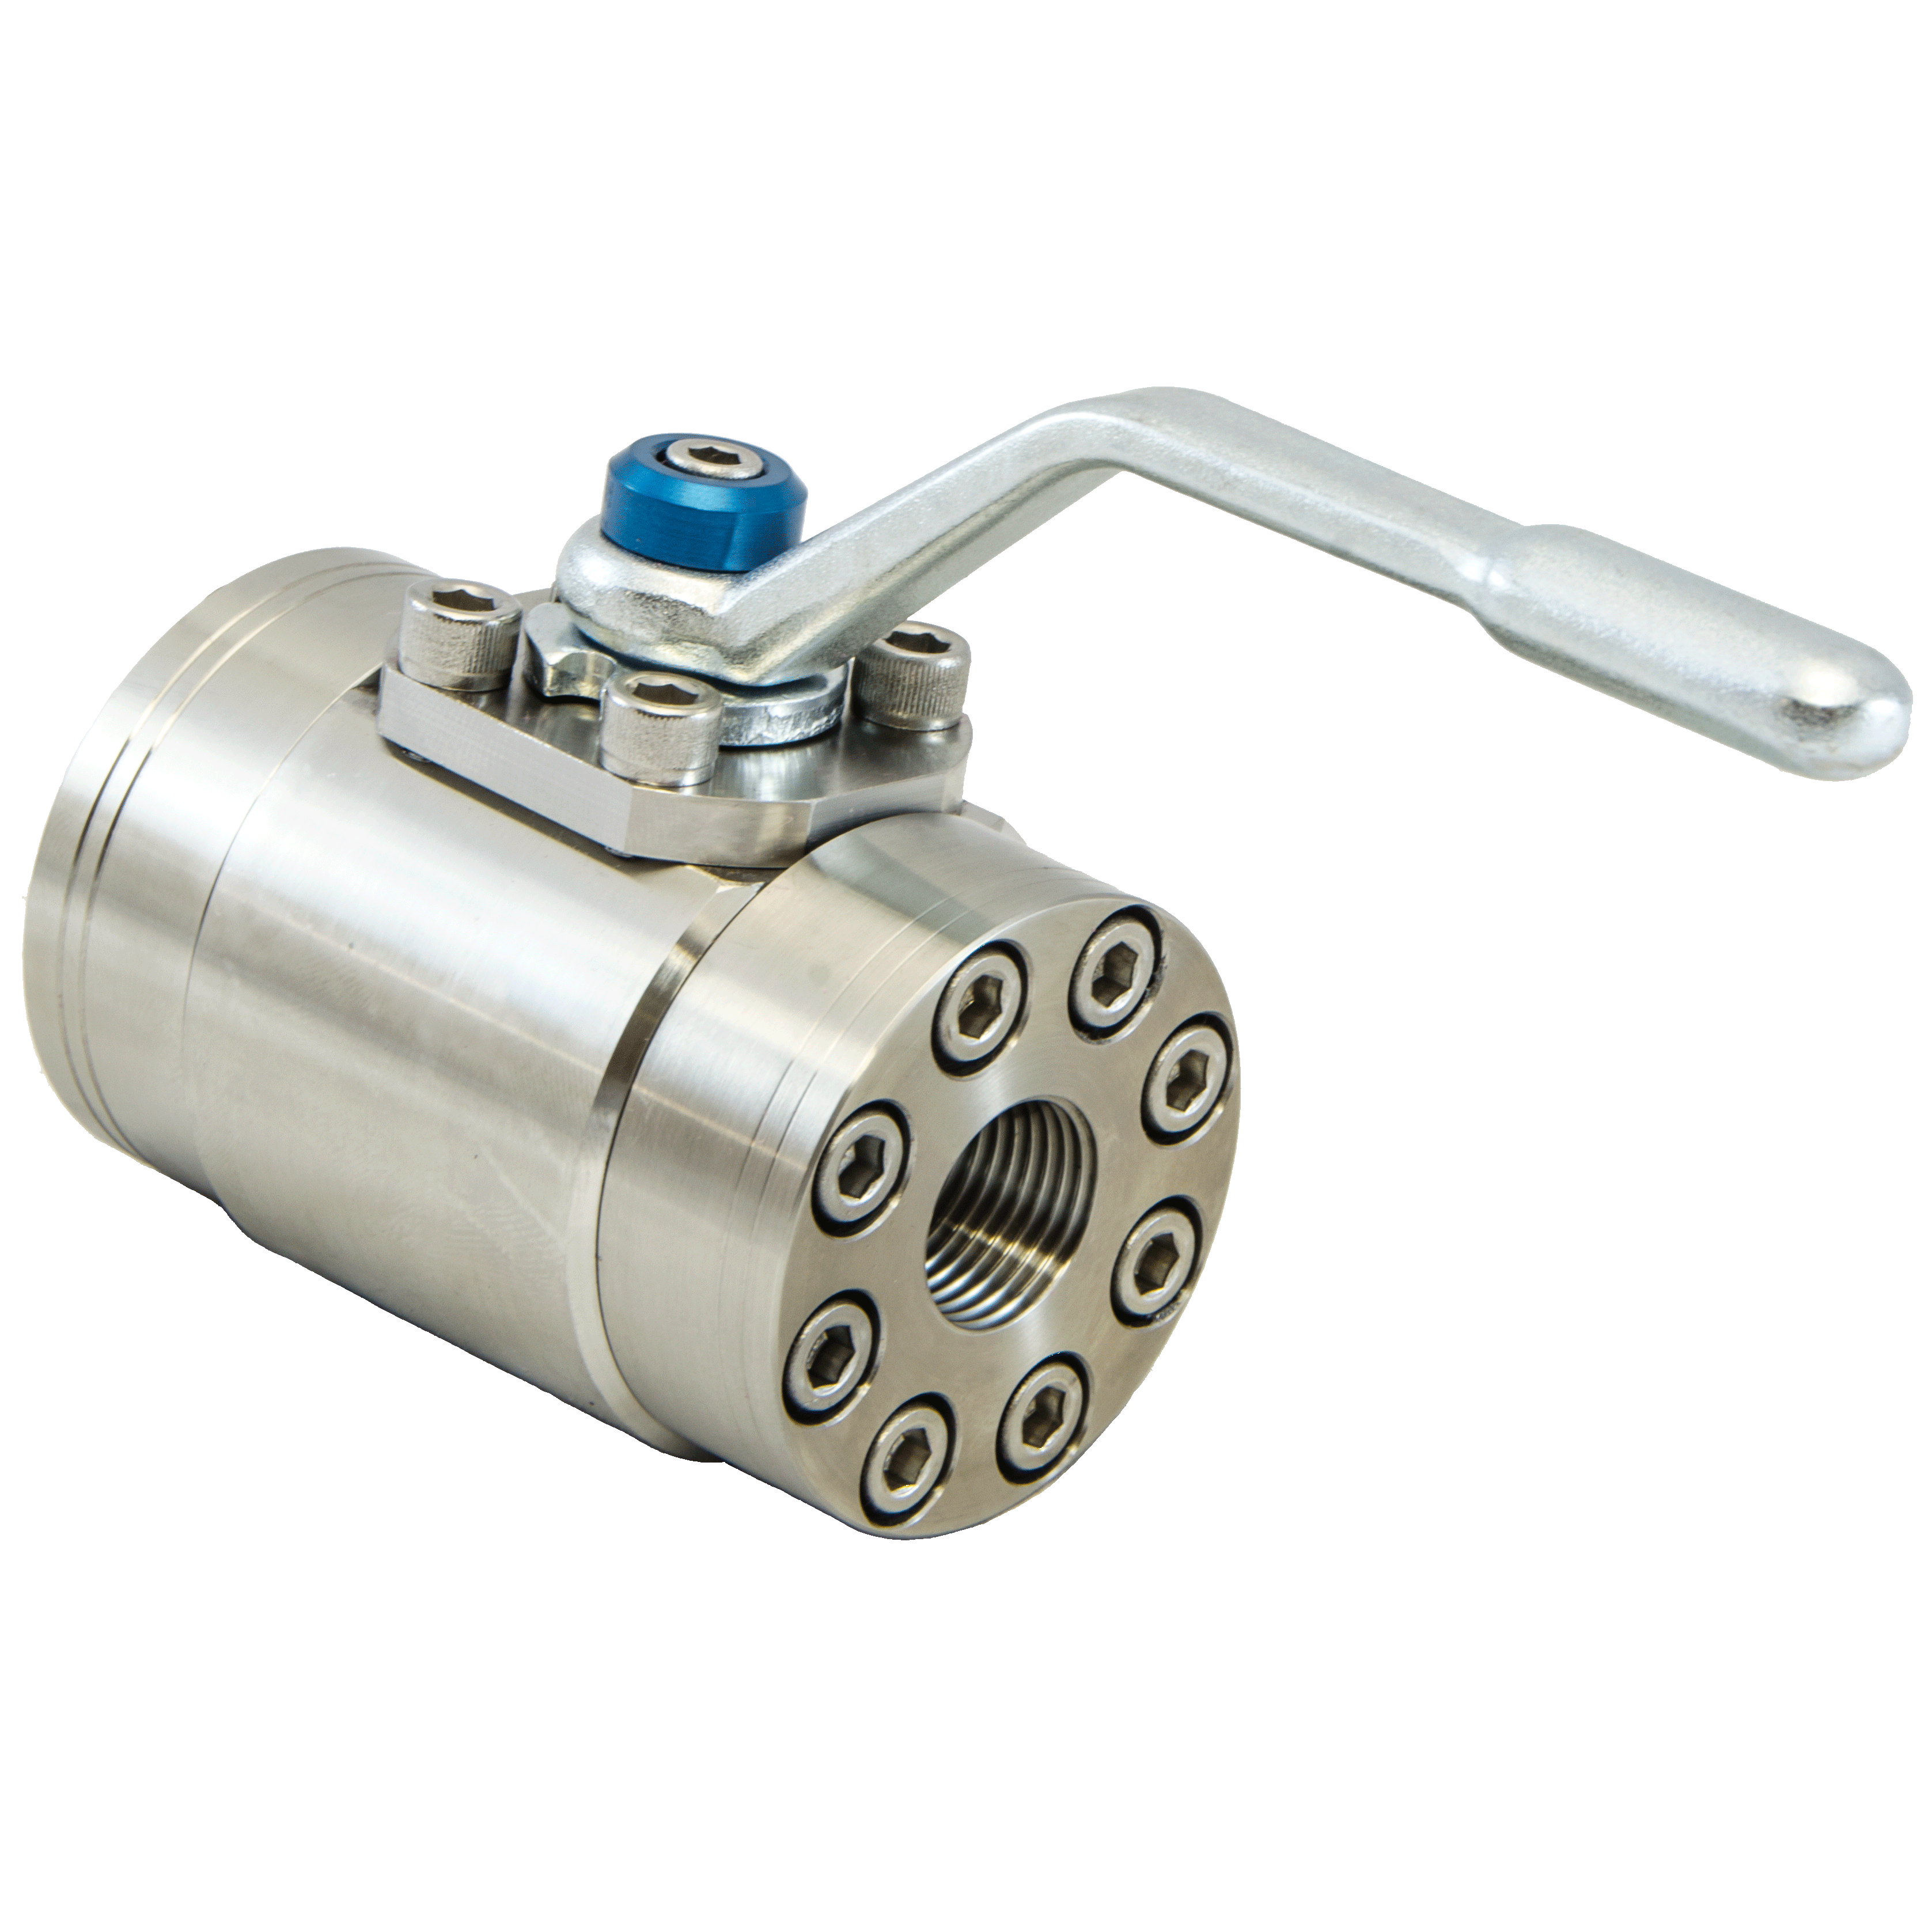 BVQG-0500S-2211 : DMIC Stainless Gas Ball Valve, #8 SAE (1/2), 316 Stainless Steel, 6000psi, Two-Way